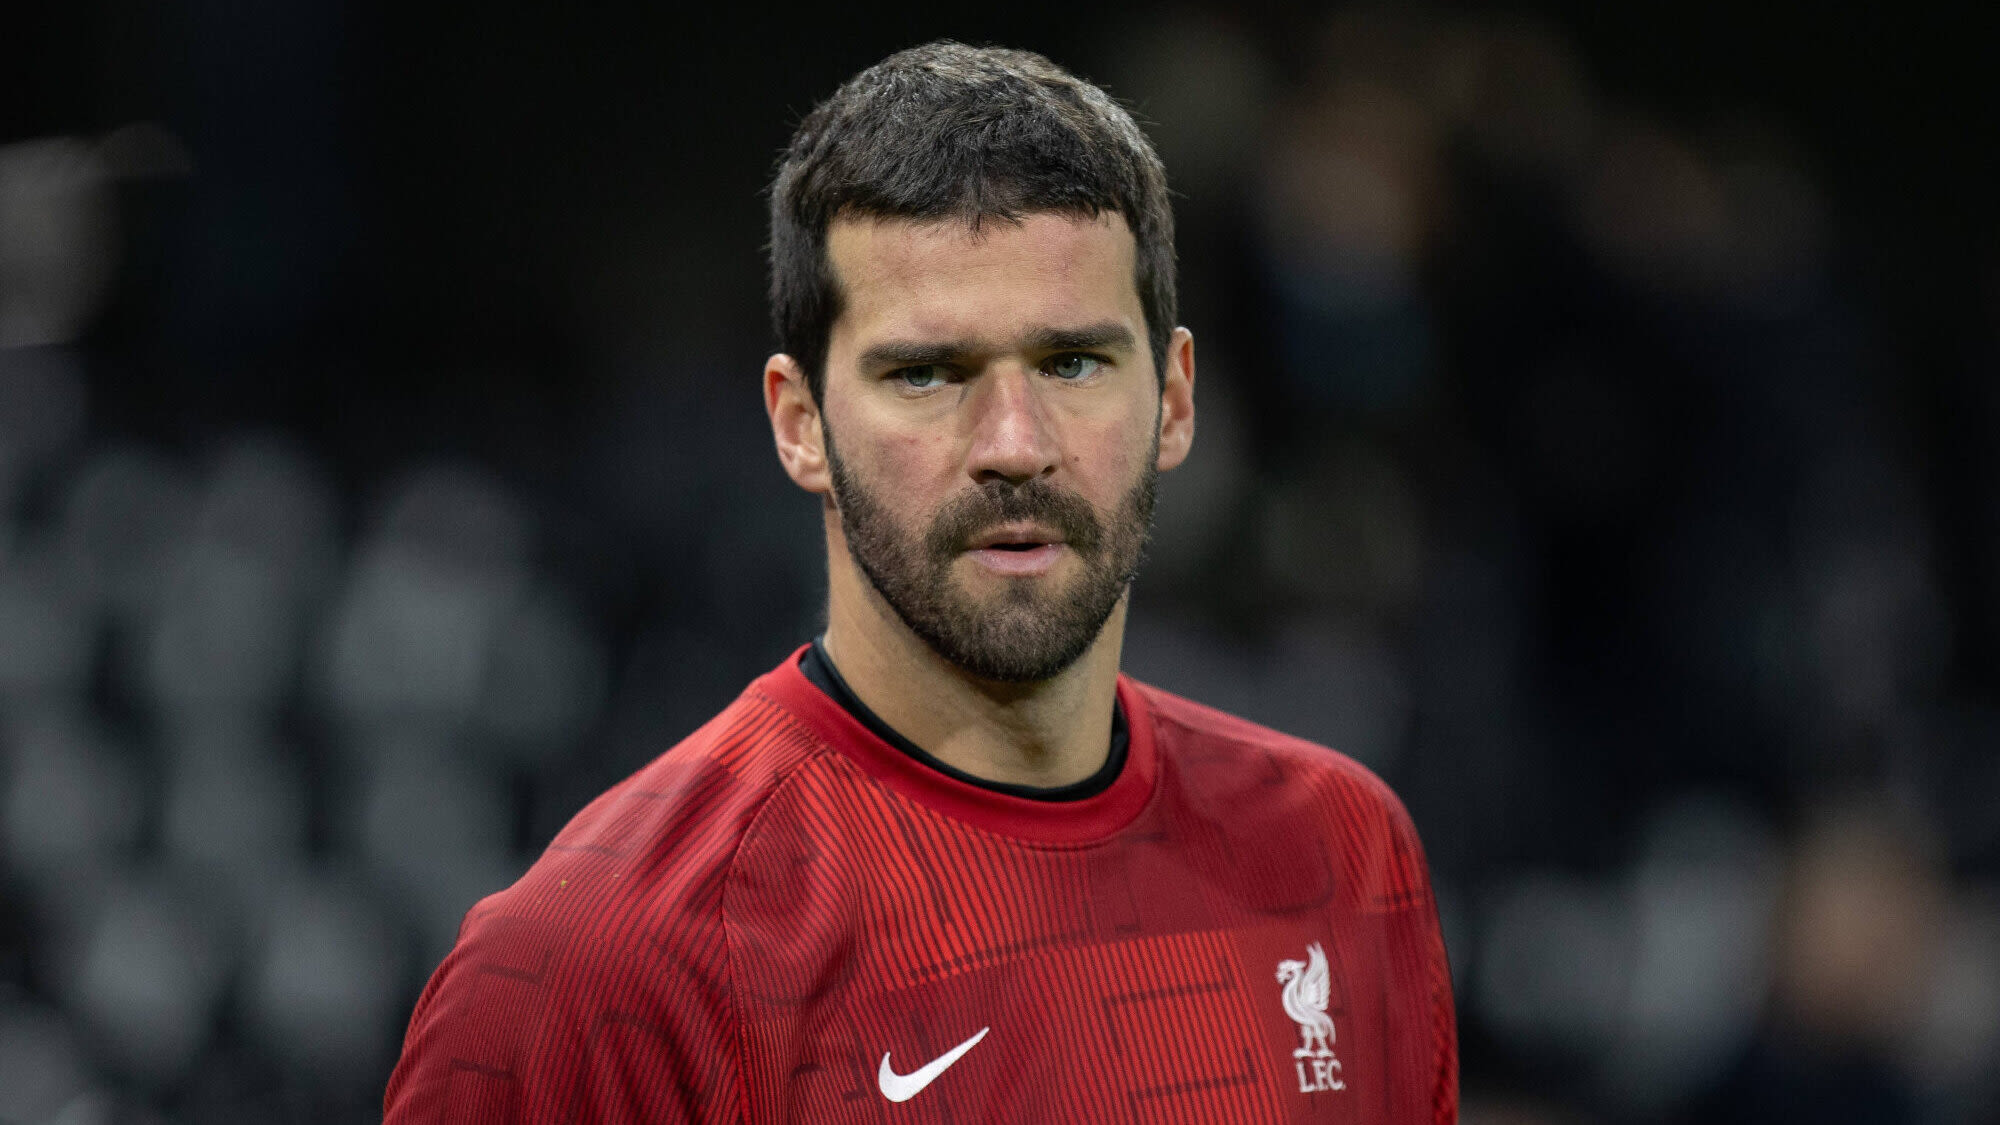 Liverpool transfer news today: MONSTER Alisson offer, French star TRACKED & Arthur Melo to EVERTON?